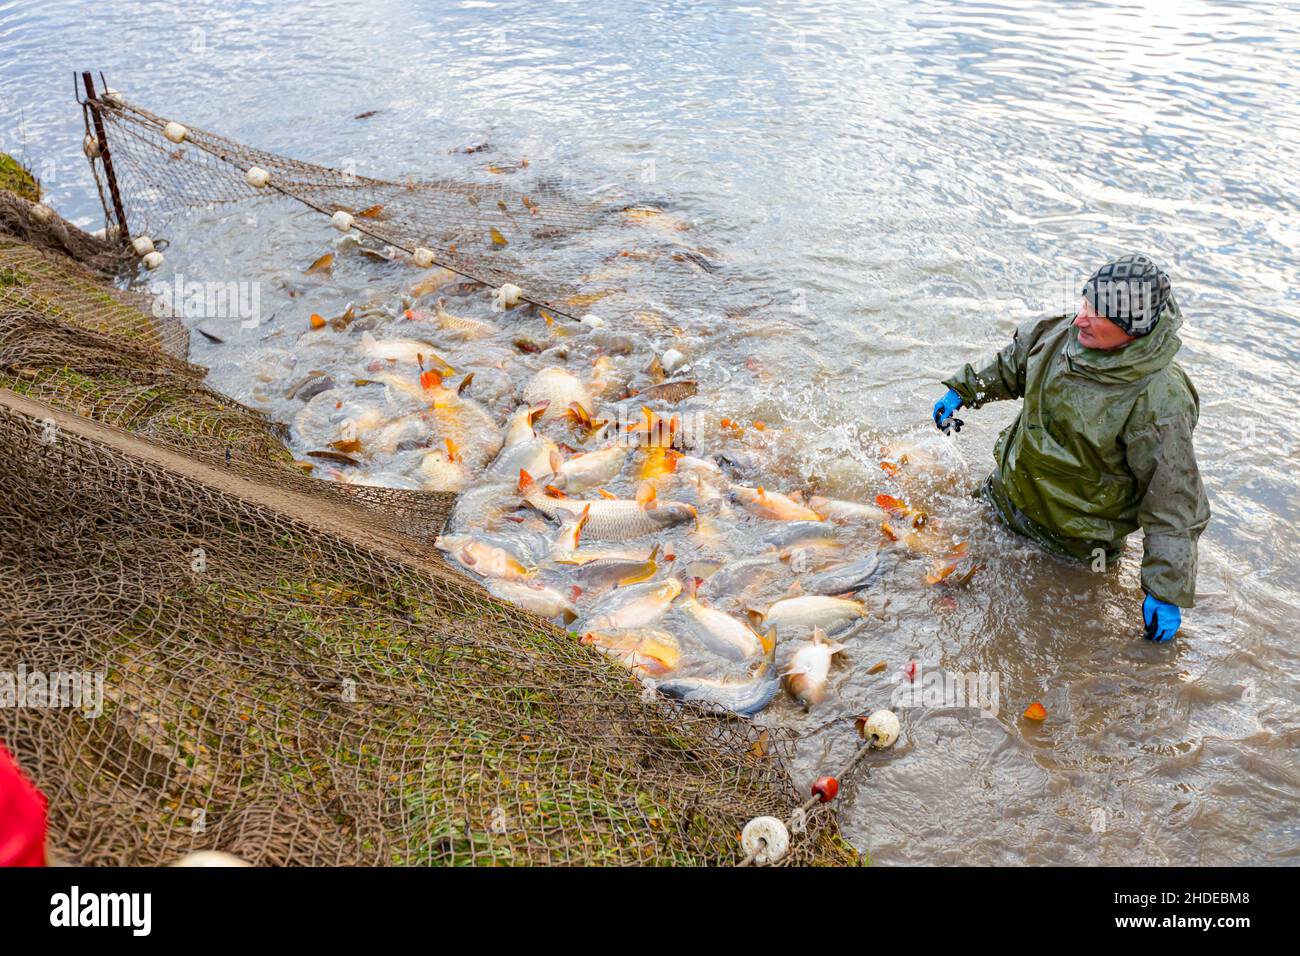 Fisherman wear waterproof overalls in fishpond he pulling fishing net full  of crap fish, harvest at fish farm Stock Photo - Alamy